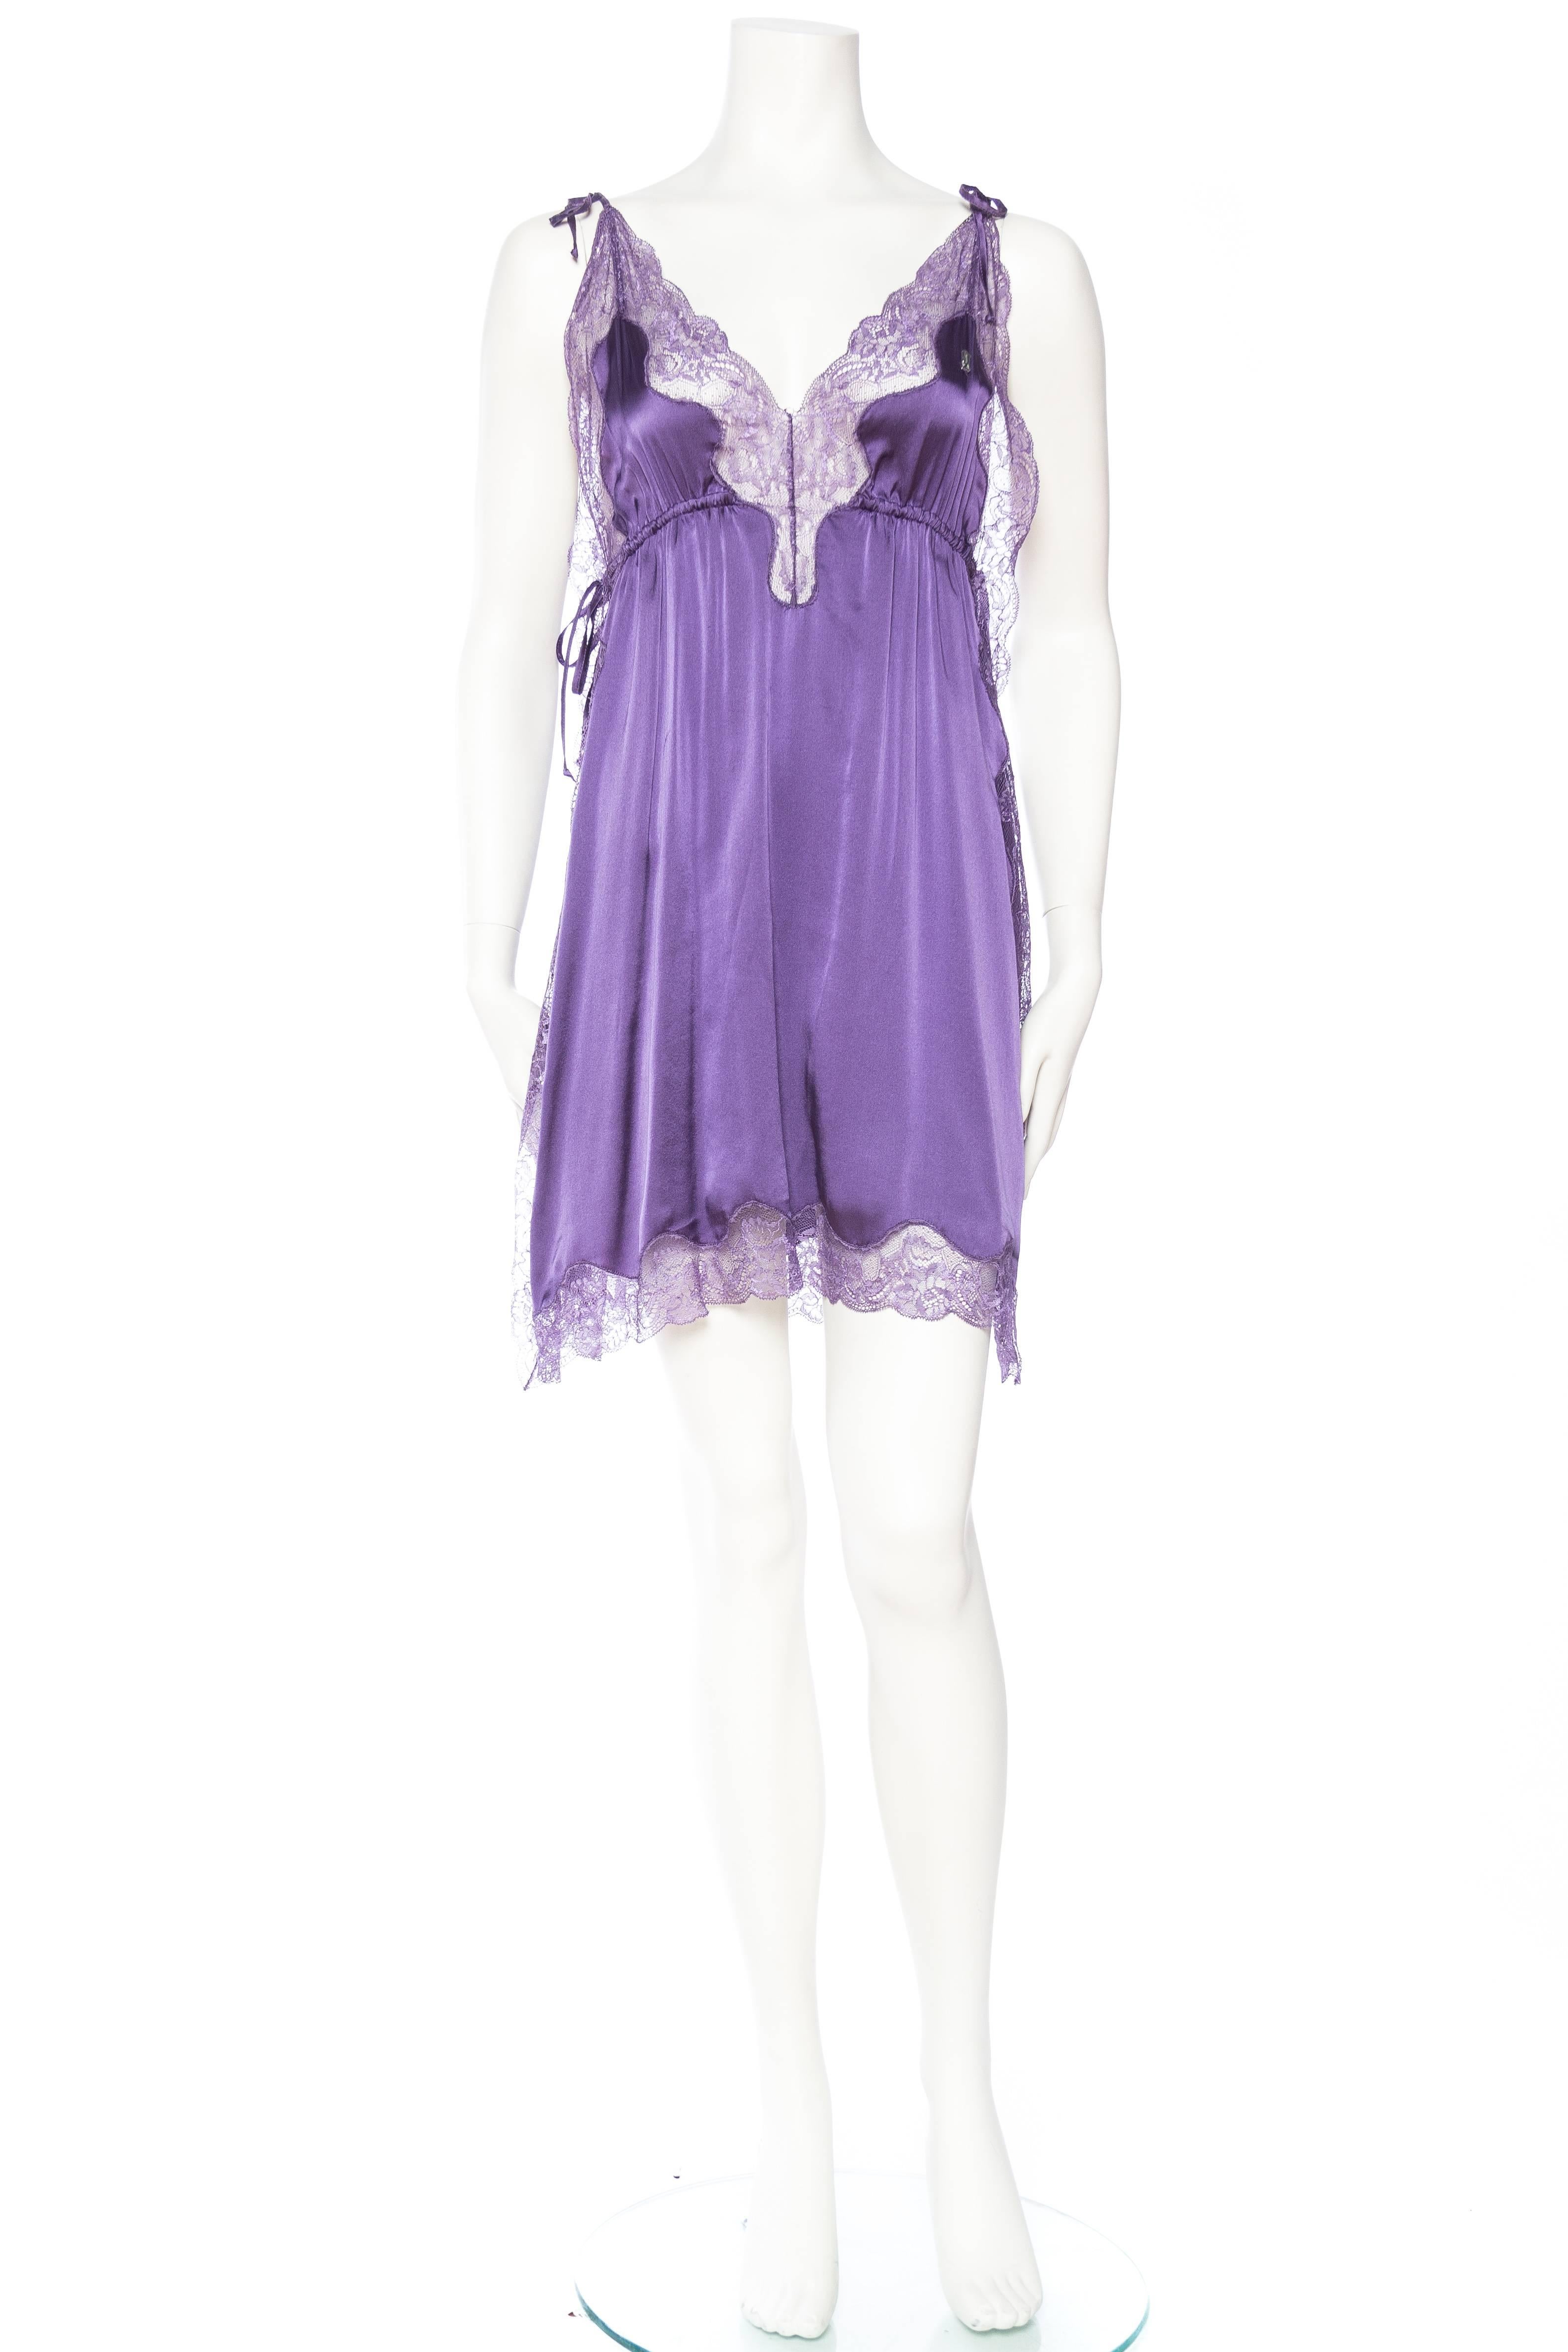 Much in the style of Chloe and Zimmermann this Galliano predates them all. A simple straight slip dress with a side zipper has two panels of satin trimmed in lace down each side. Adjustable ties at the shoulder and sides for a flirty vibe. 